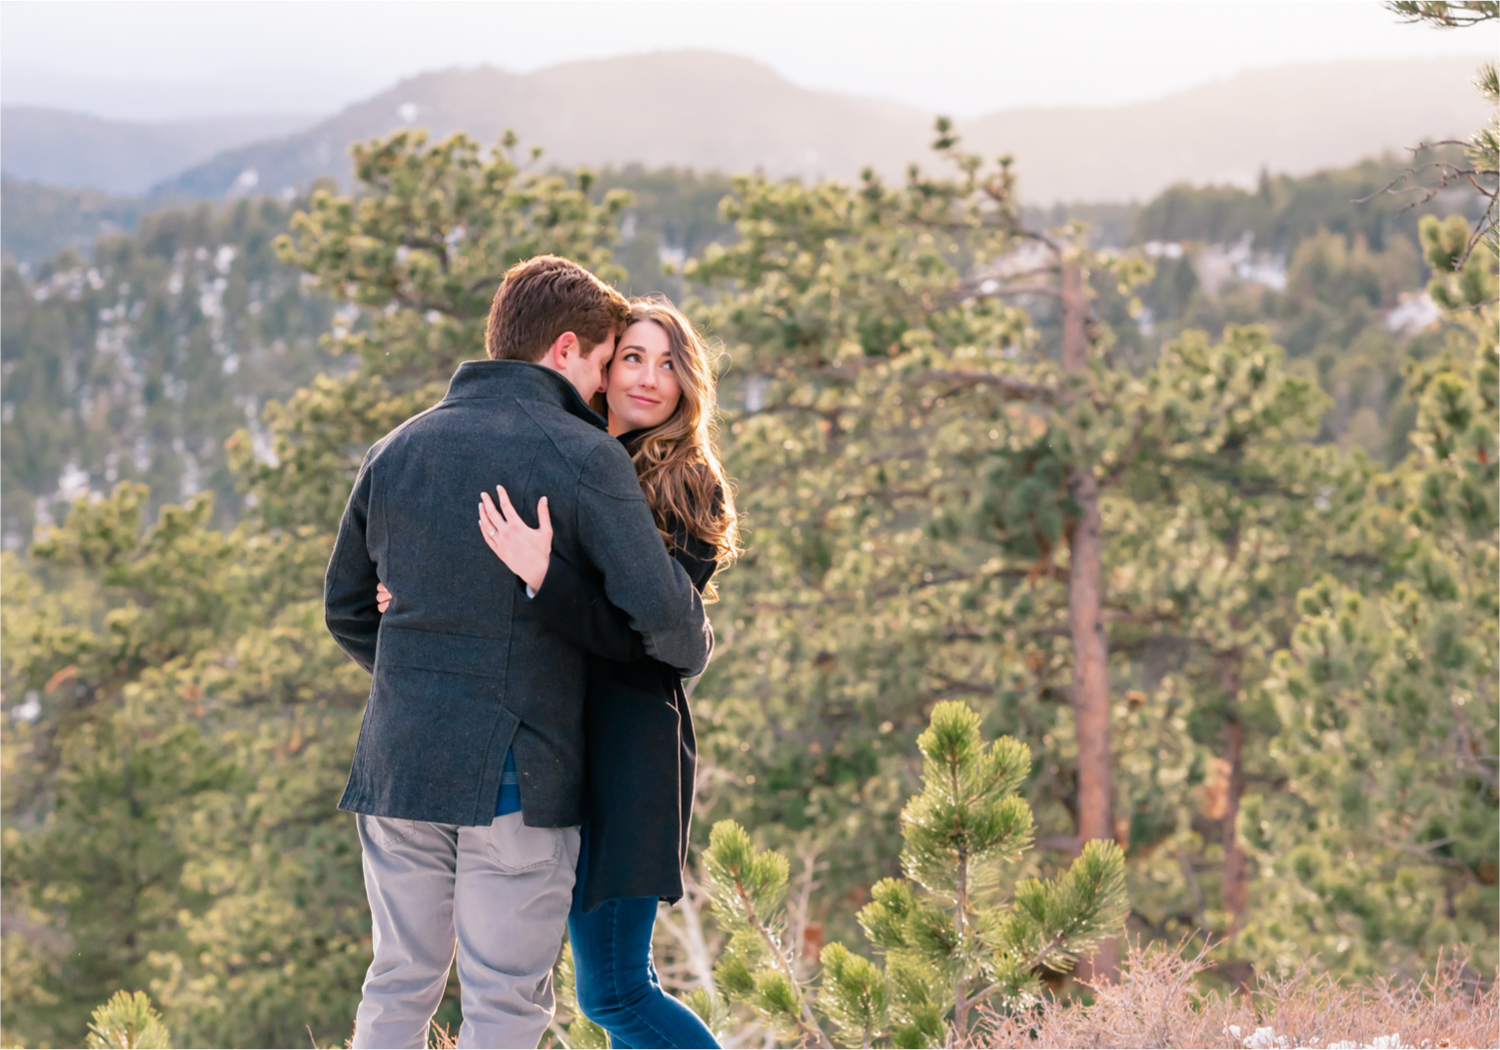 Rocky Mountain Winter Engagement in Colorado | Britni Girard Photography | Husband and Wife Photography and Cinematography Team | A snowy overlook in Roosevelt National Park